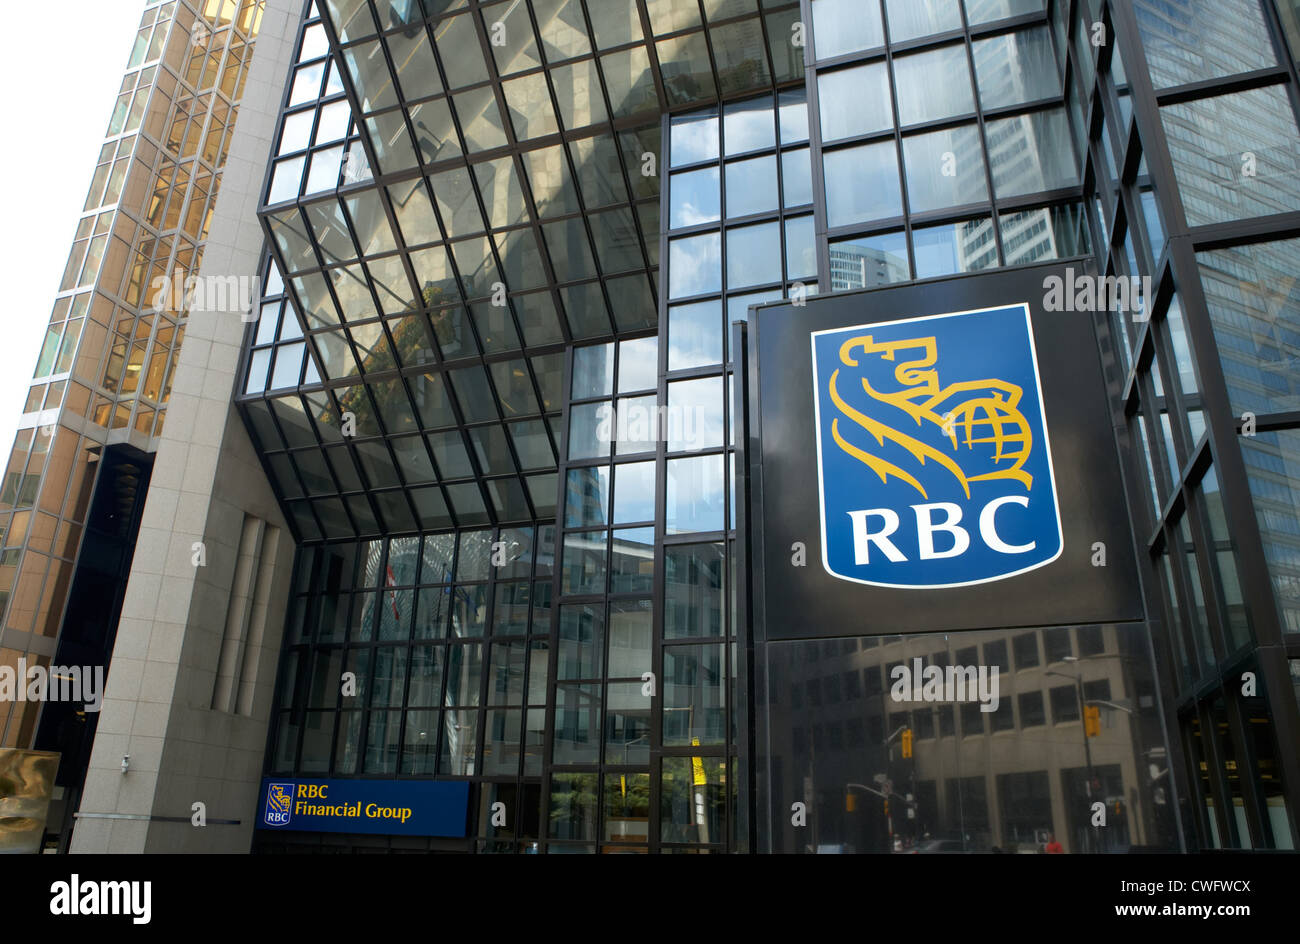 Rbc Financial Group Royal Bank Of Canada High Resolution Stock Photography  and Images - Alamy